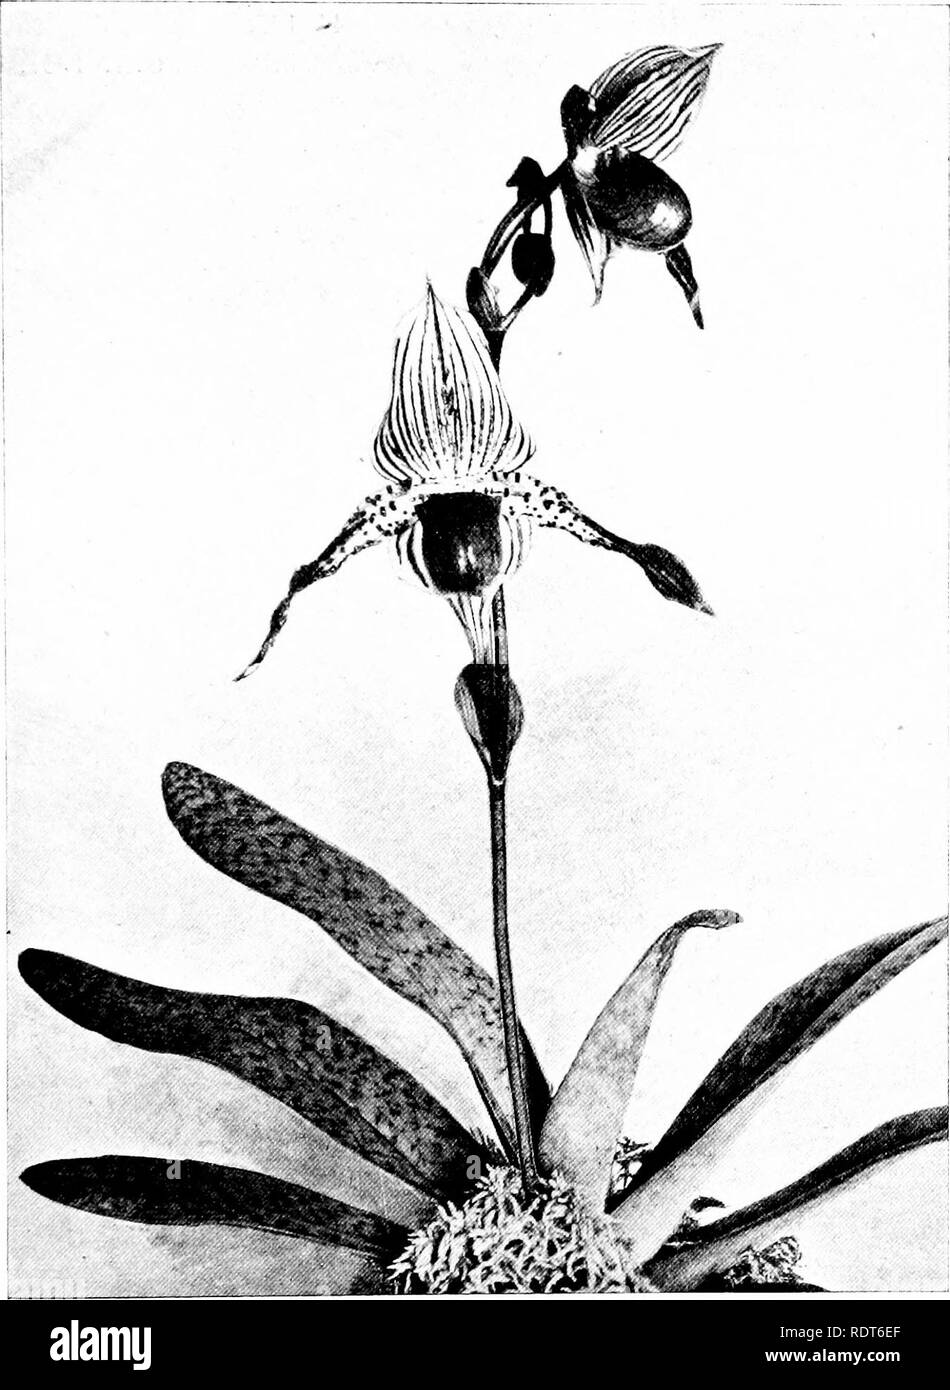 . The orchid stud-book: an enumeration of hybrid orchids of artificial origin, with their parents, raisers, date of first flowering, references to descriptions and figures, and synonymy. With an historical introduction and 120 figures and a chapter on hybridising and raising orchids from seed. Orchids. THE ORCHID STUD-BOOK. 213 C. X Unixia, G.C. 1900, ii. 214 ; O.K. 1900, 314. 584. P. x Urania (Charlesworthii x Io 5).—Cappe, 1900. C. x (unnamed), J.S.H.Fr. 1900, 537.—Cappe. C. x Urania, G.C. 1901, i. 374 ; 0 R. 1901, 218.—Cappe.. Fig. 8i. Paphiopedilum X Venetia- C. x Martin-Cahuzac, J.S.H.Fr. Stock Photo